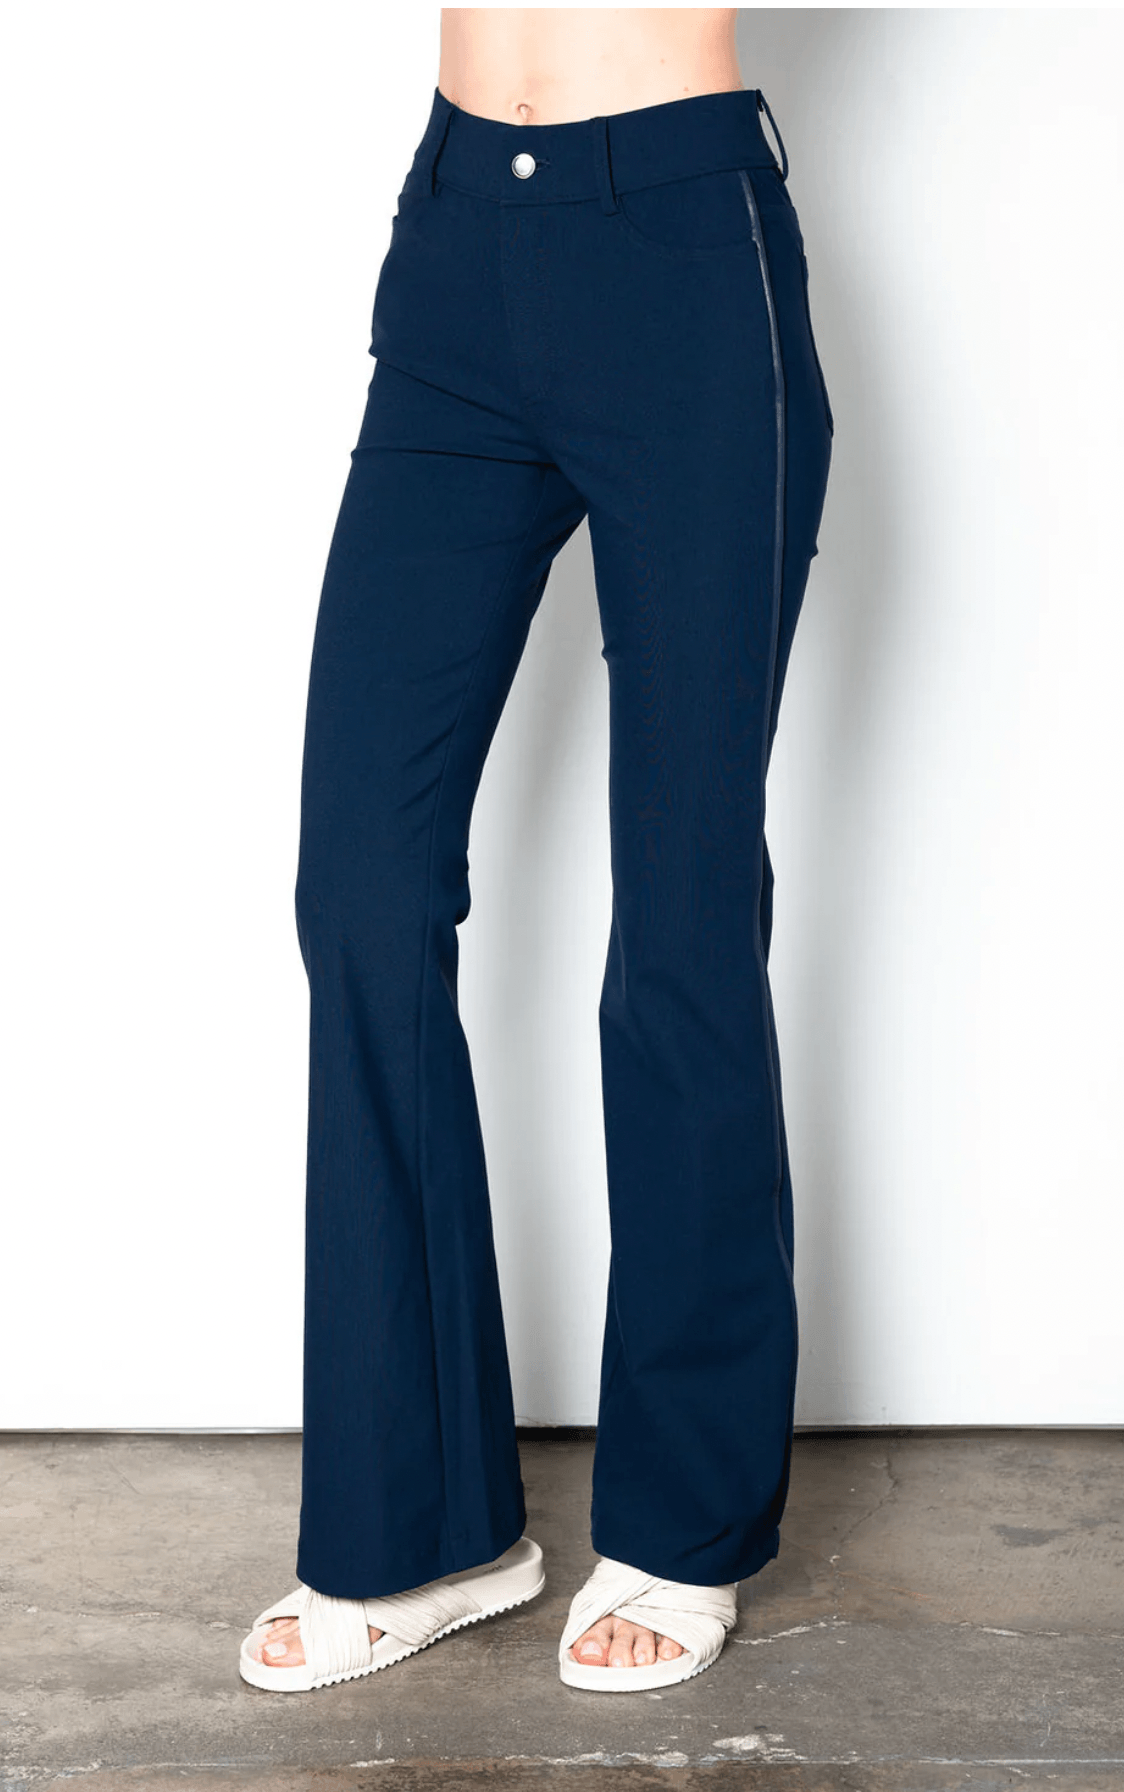 Tech Stretch Flare Jean by Elaine Kim - Haven